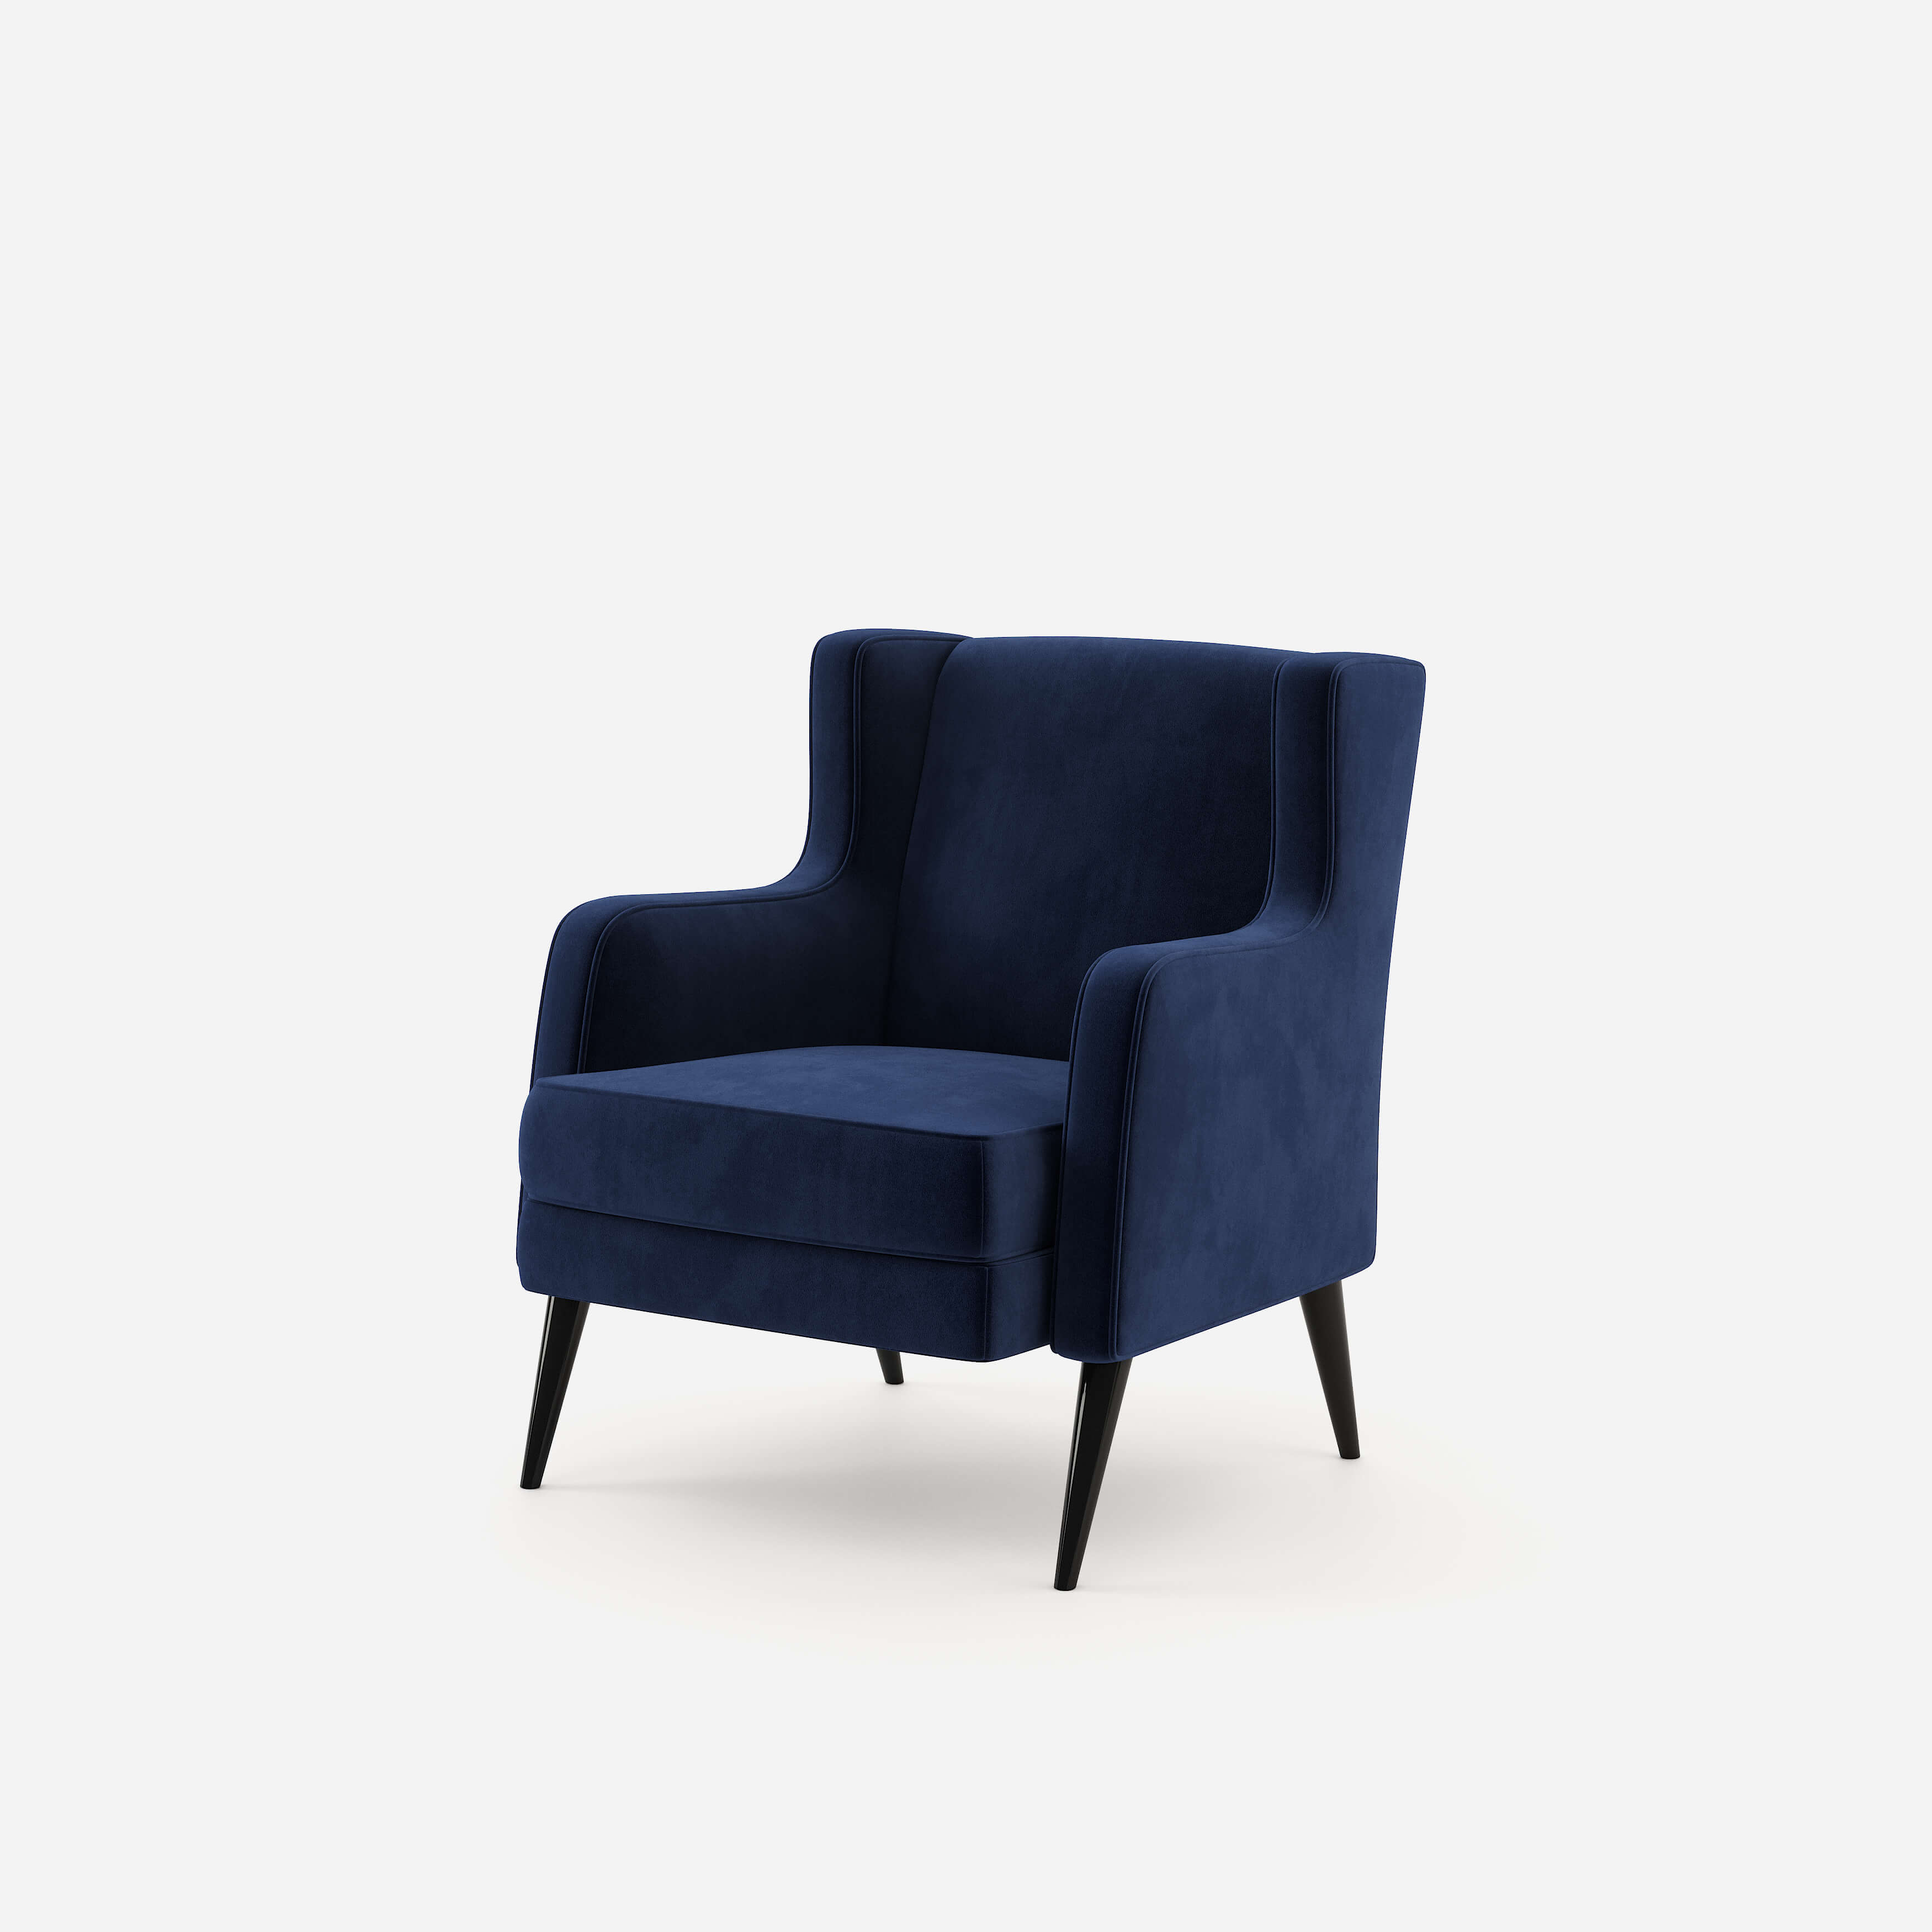 tania-armchair-cadeirao-navy-blue-living-room-modern-charm-classic-home-decor-house-decorating-interior-design-project-contract-1